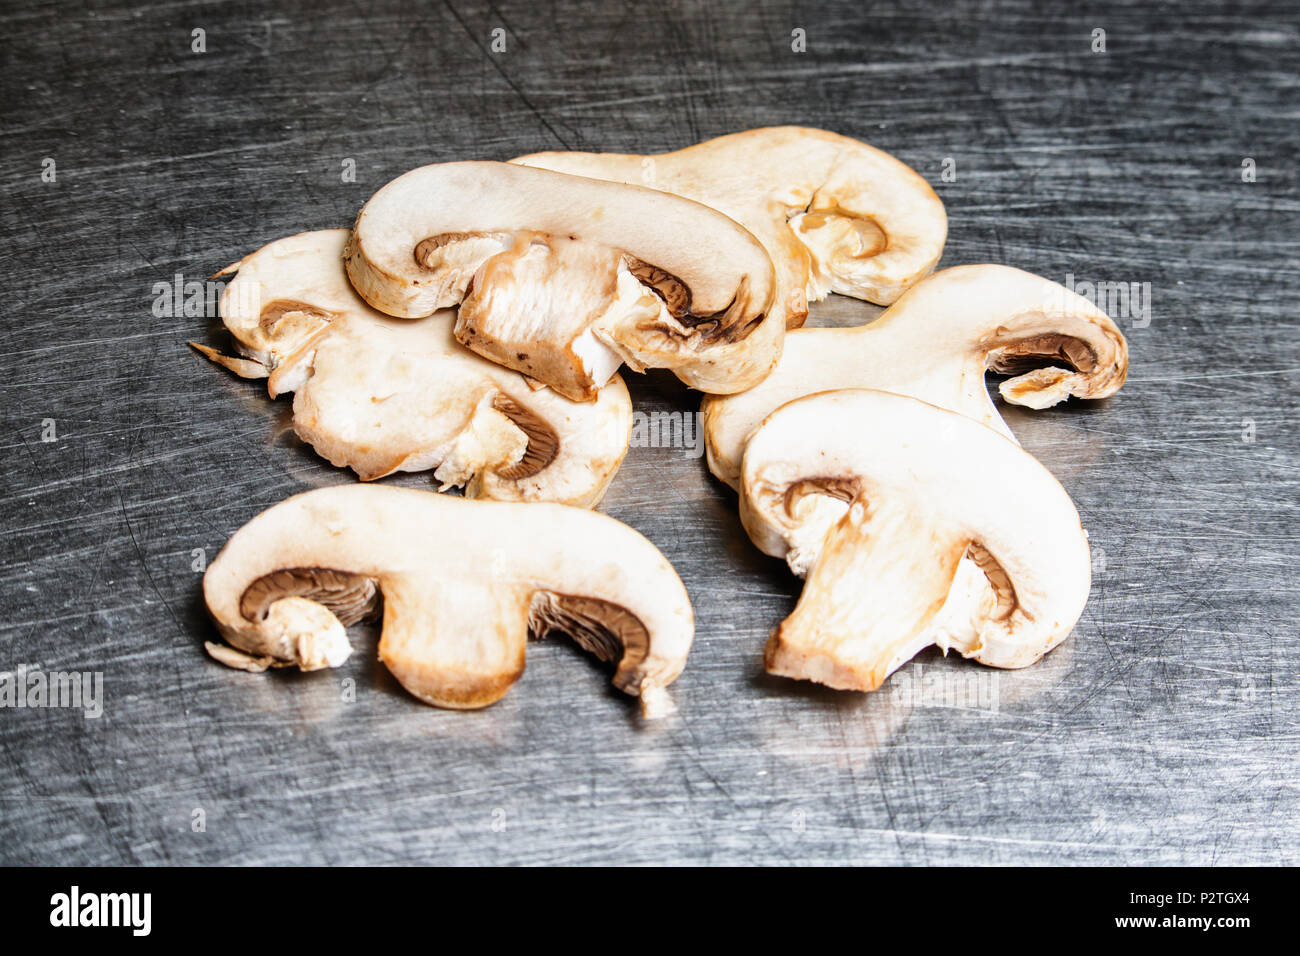 Sliced Mushrooms on a stainless steel background Stock Photo